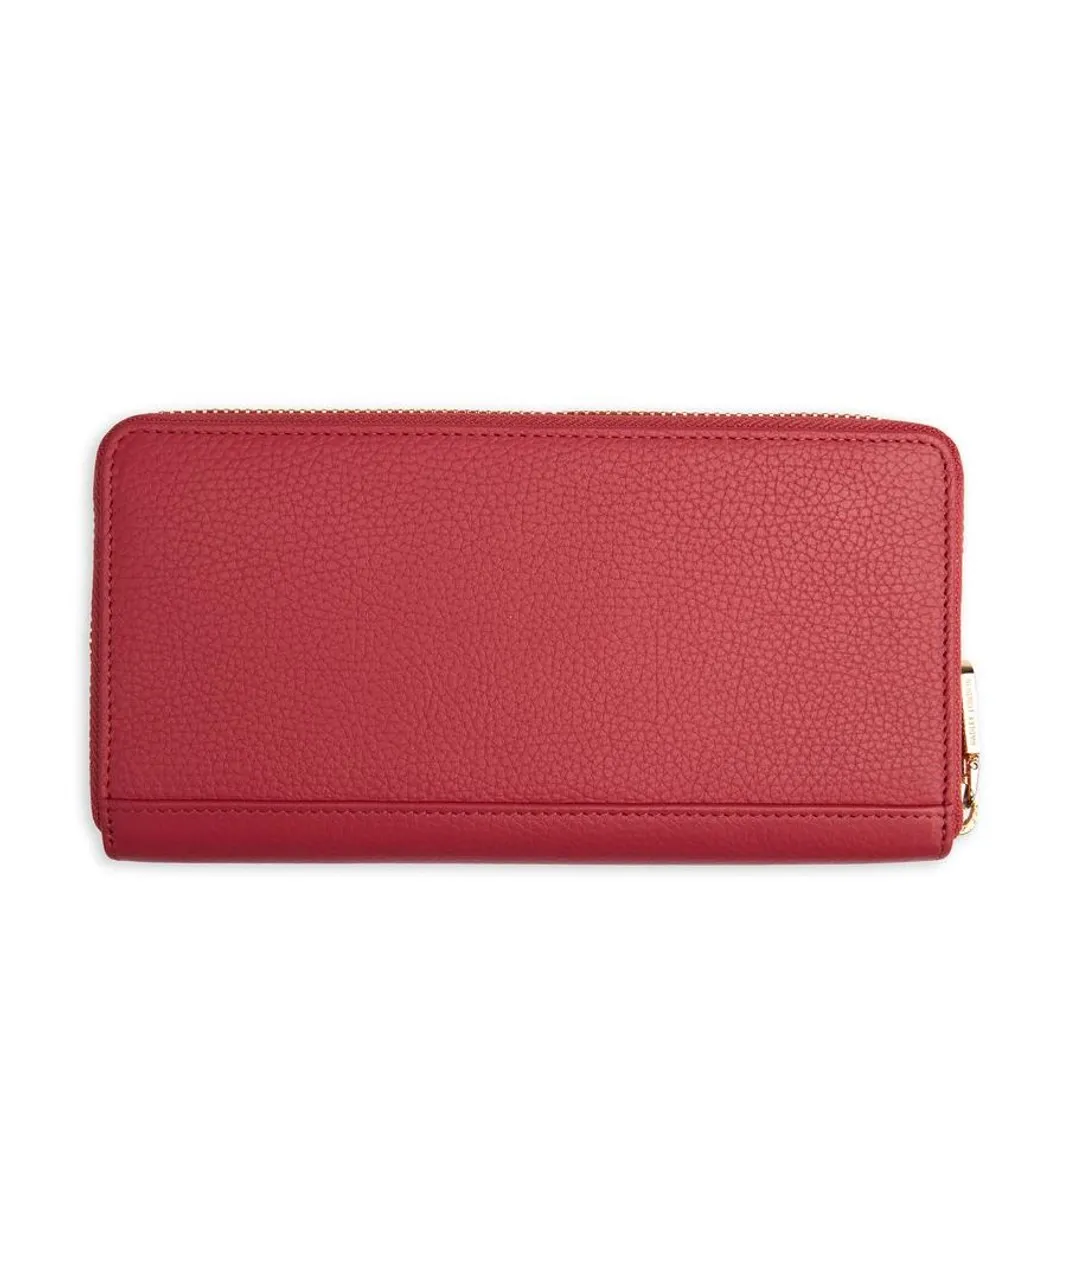 Radley Womens Stamp Purse - Red - One Size